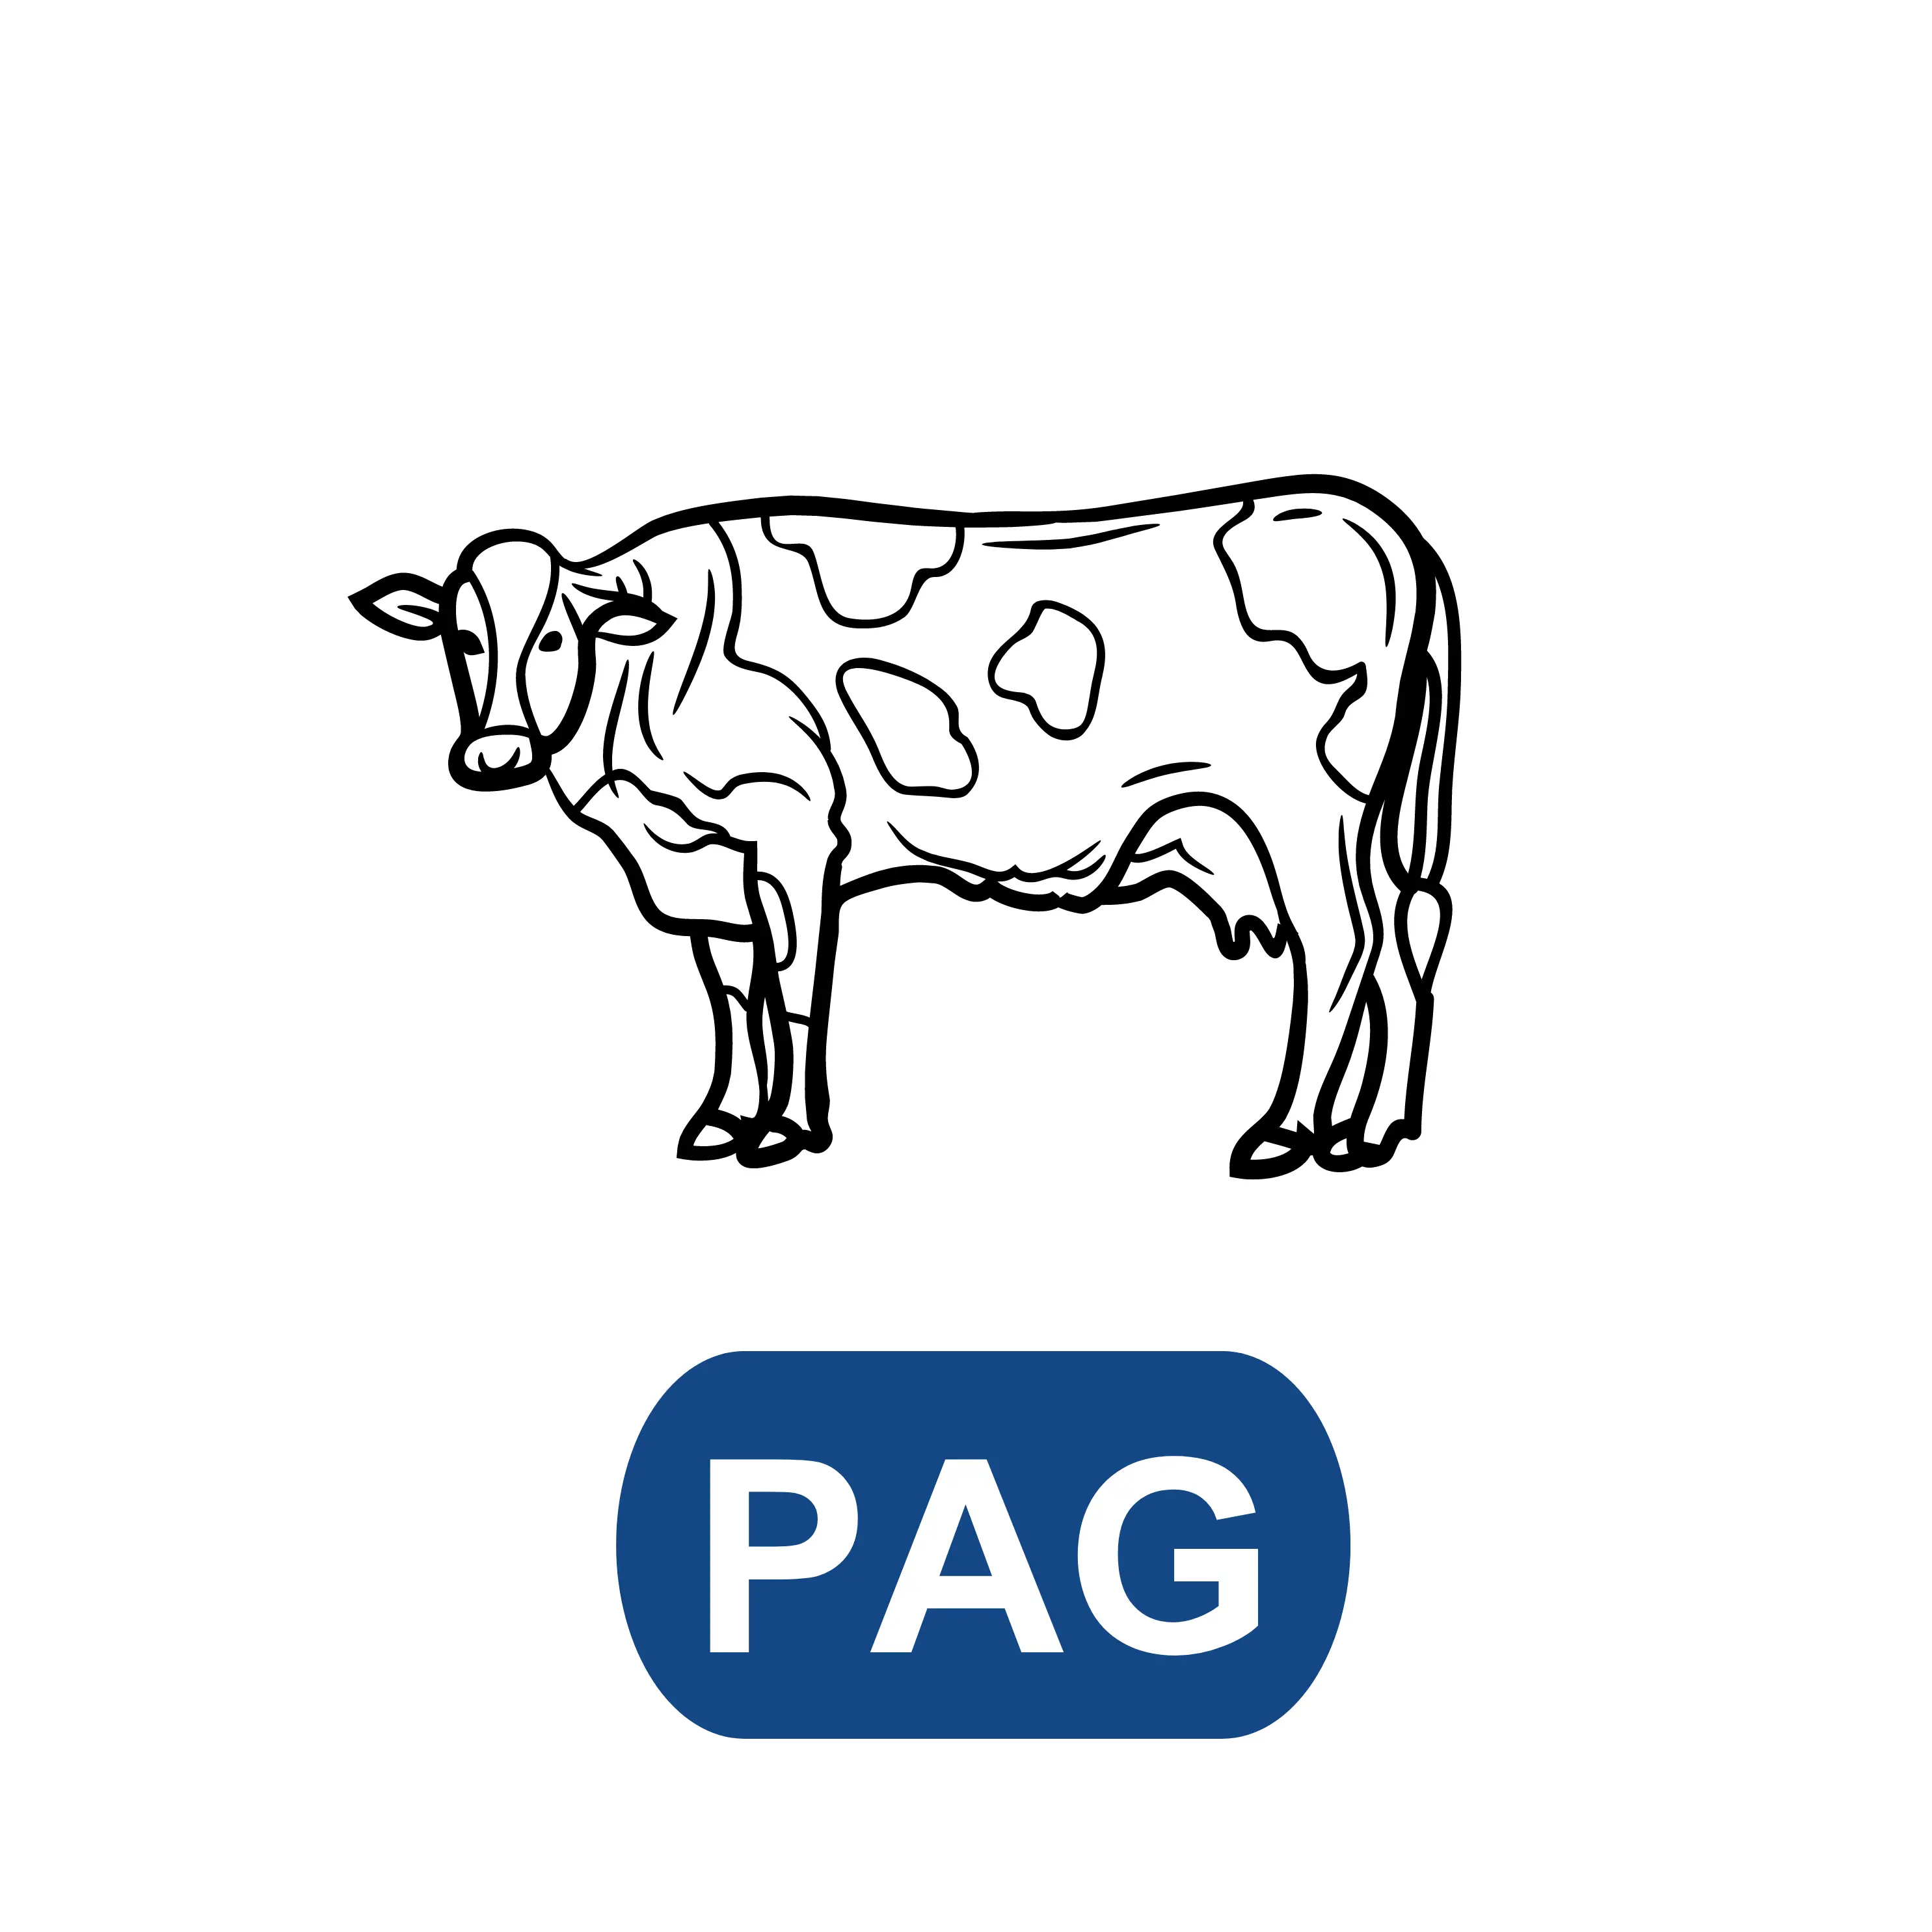 Cow Pregnancy-associated glycoproteins (PAG) test